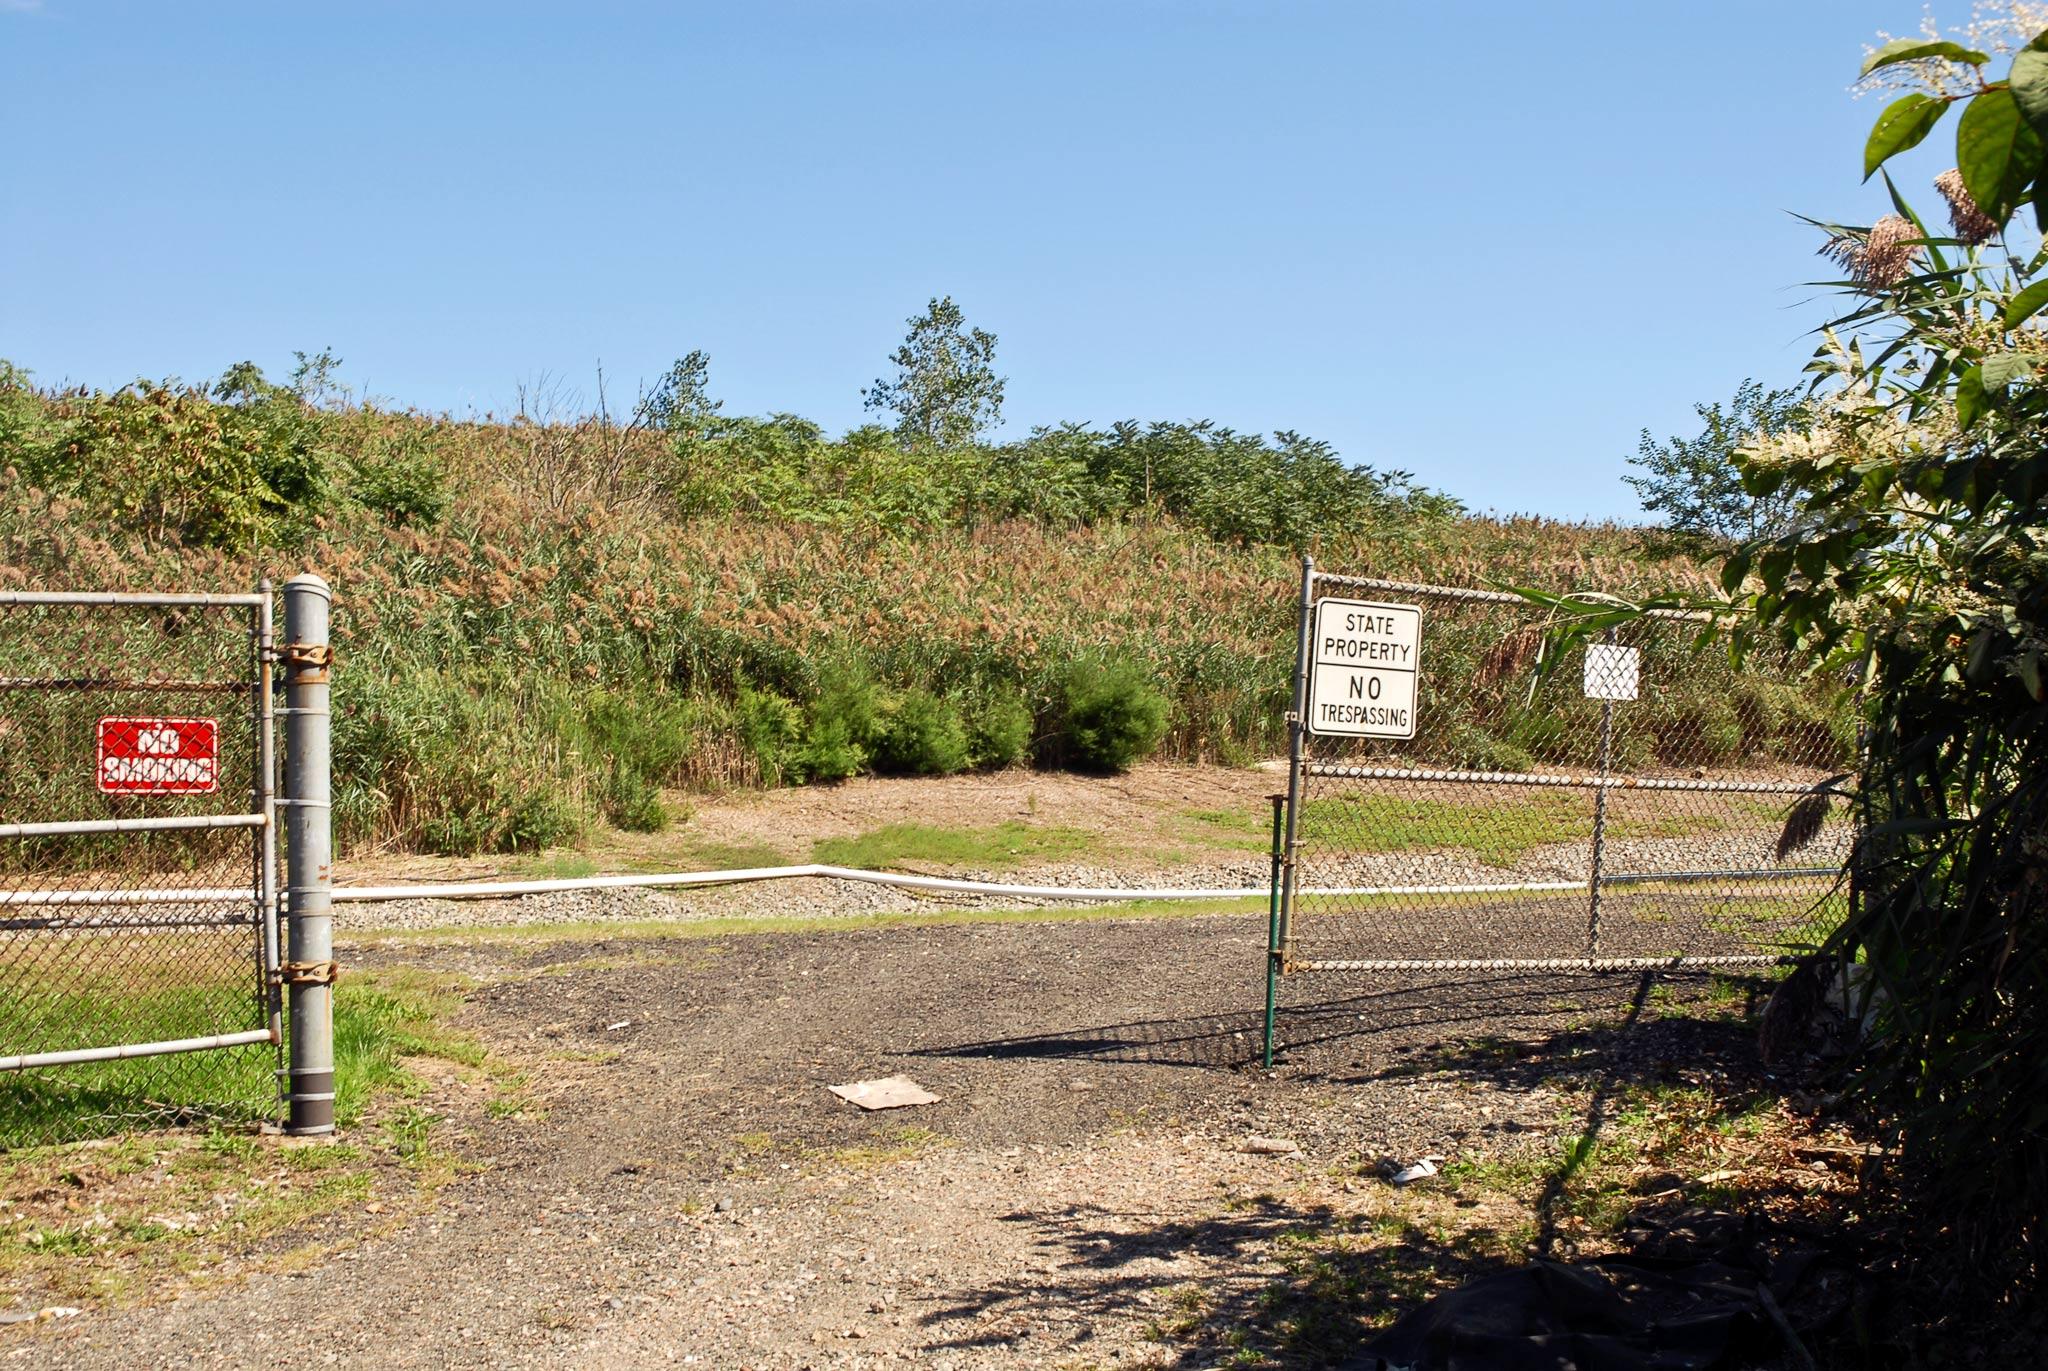 An entry gate on a gravel road with a vegetated landmass in the background